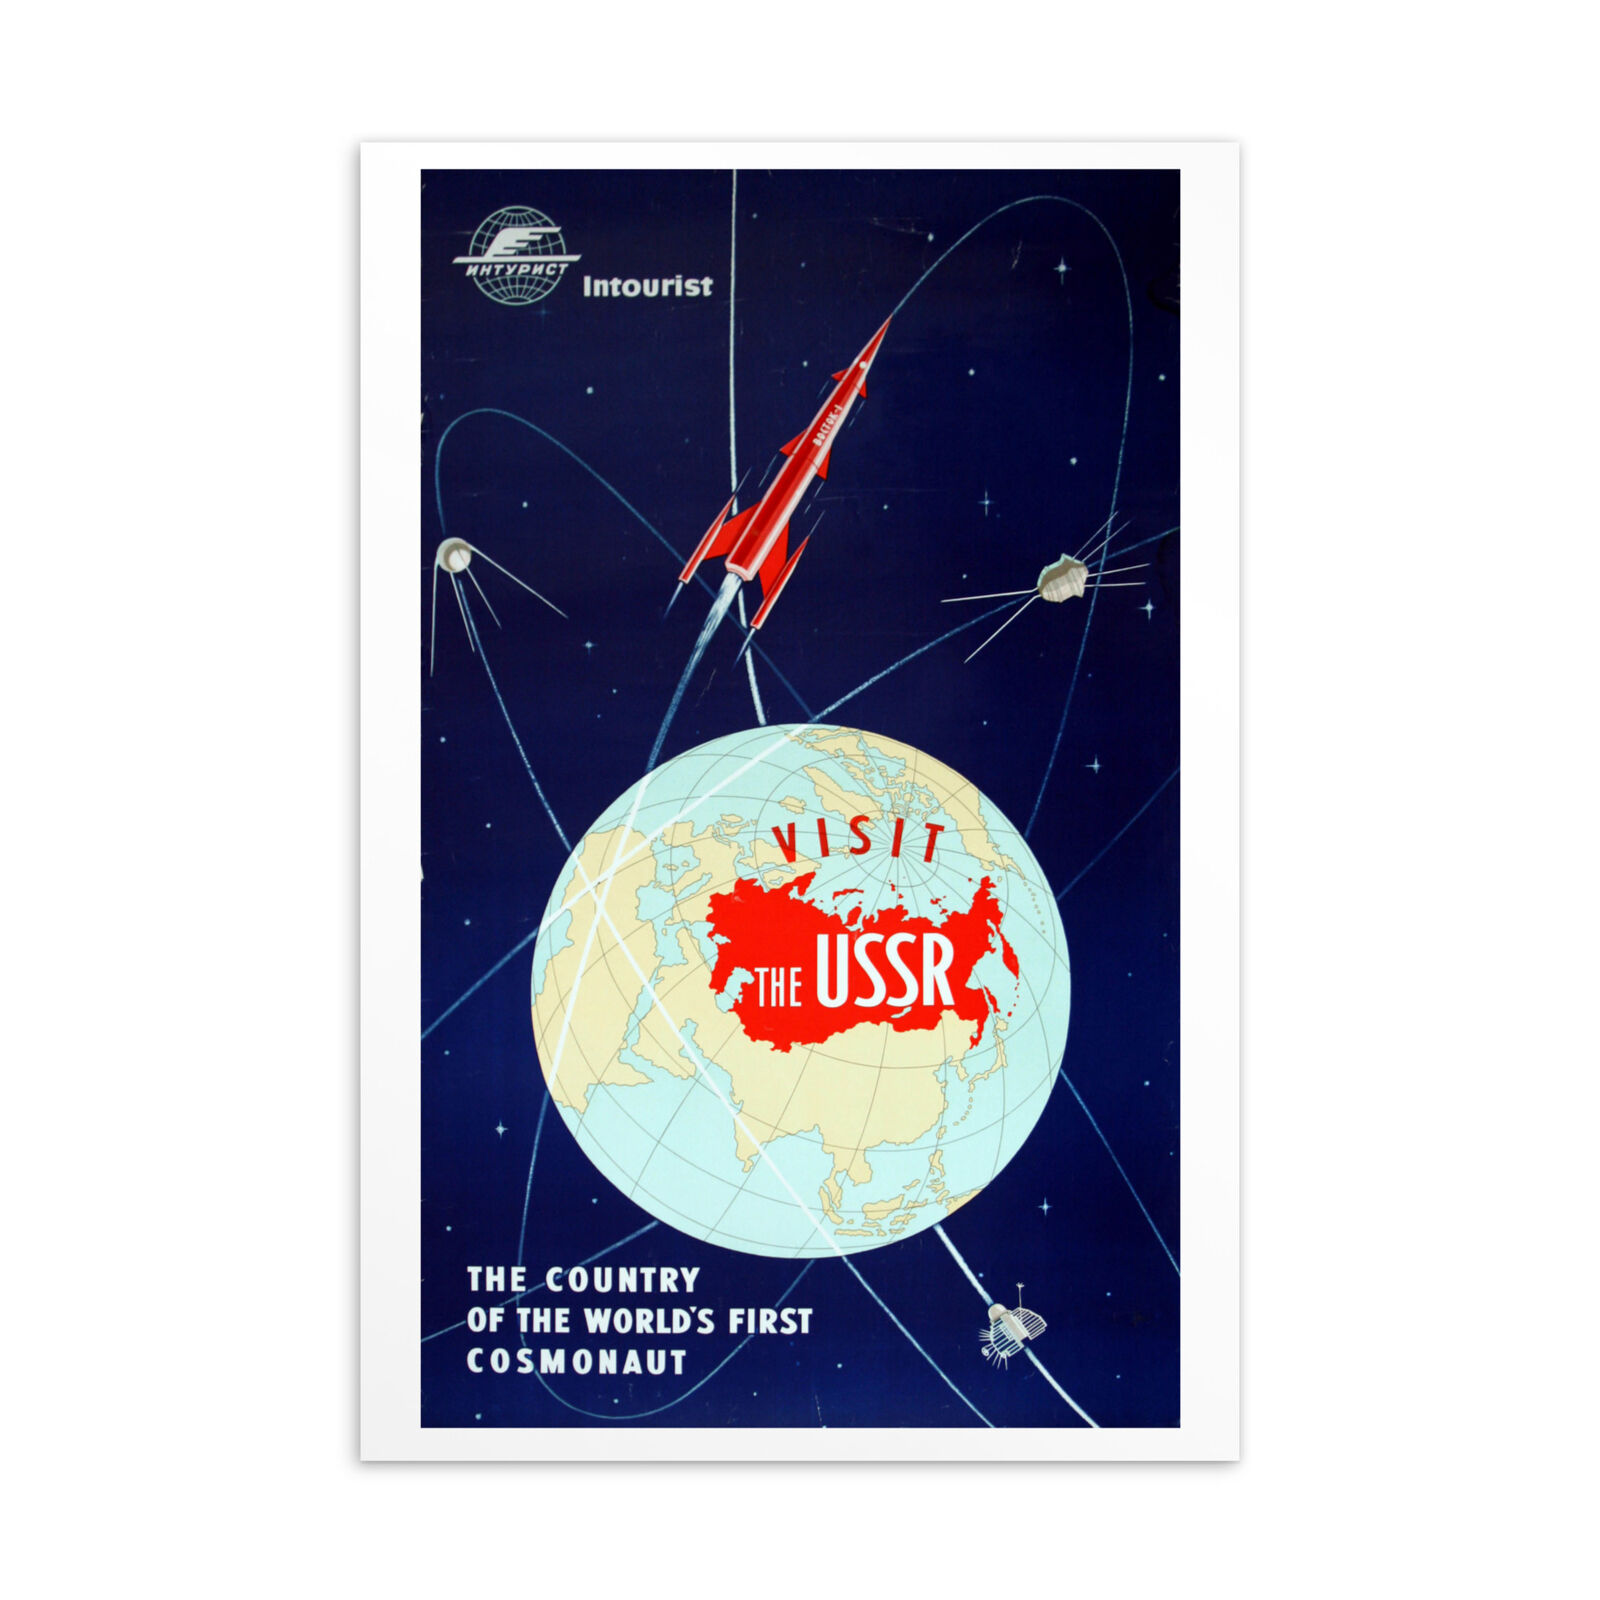 Visit The USSR The Country of The World's First Cosmonauts Postcard